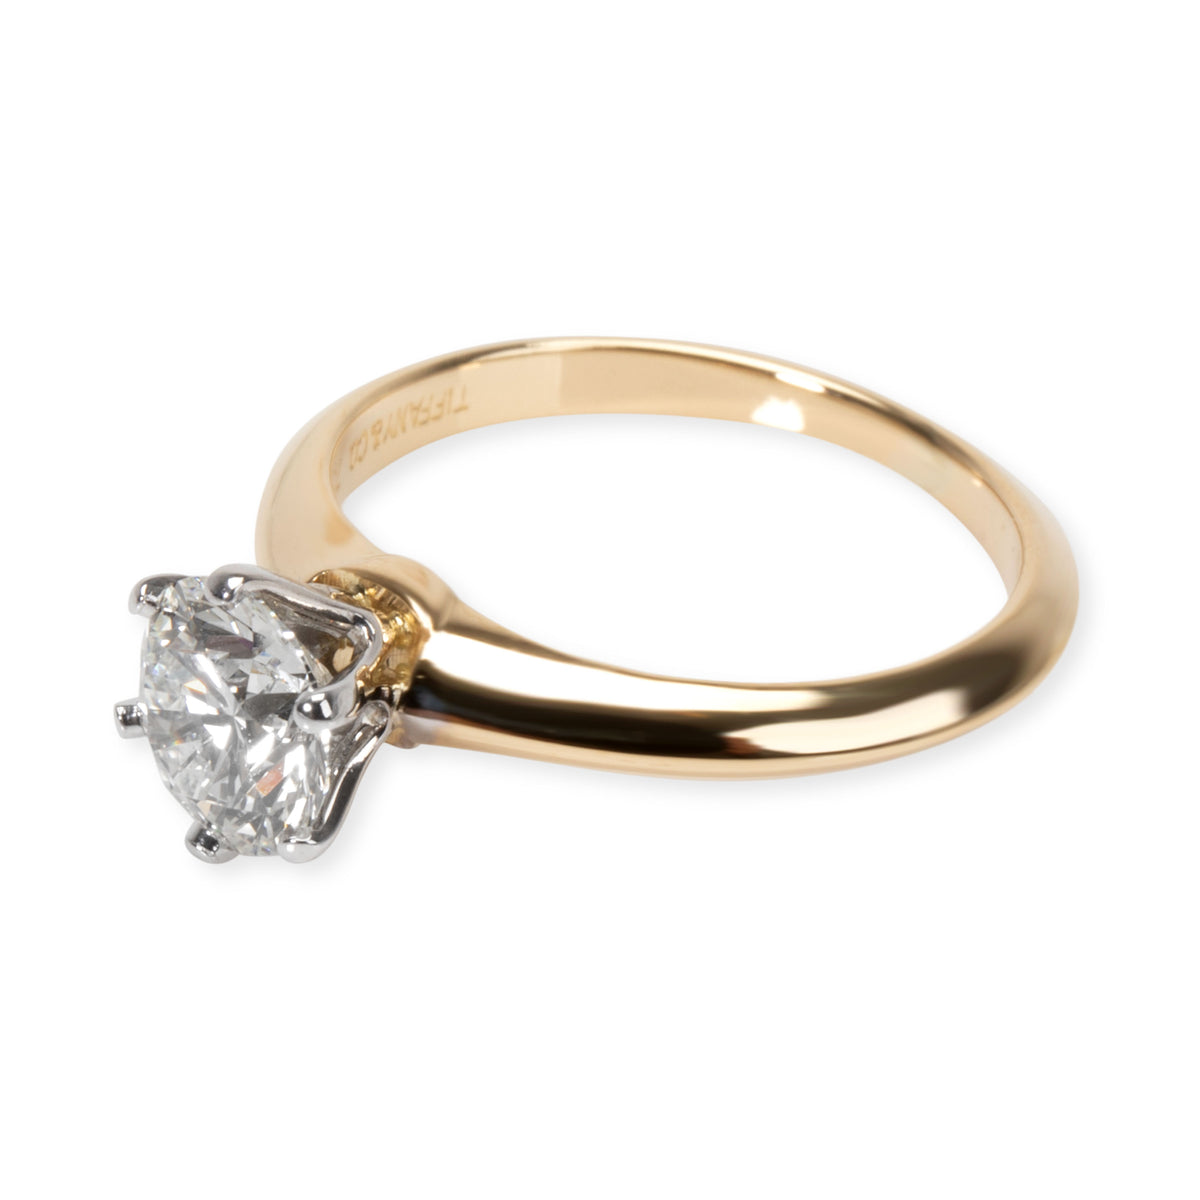 Tiffany & Co. Solitaire Diamond Engagement Ring in 18K Yellow Gold (0.85 ct)